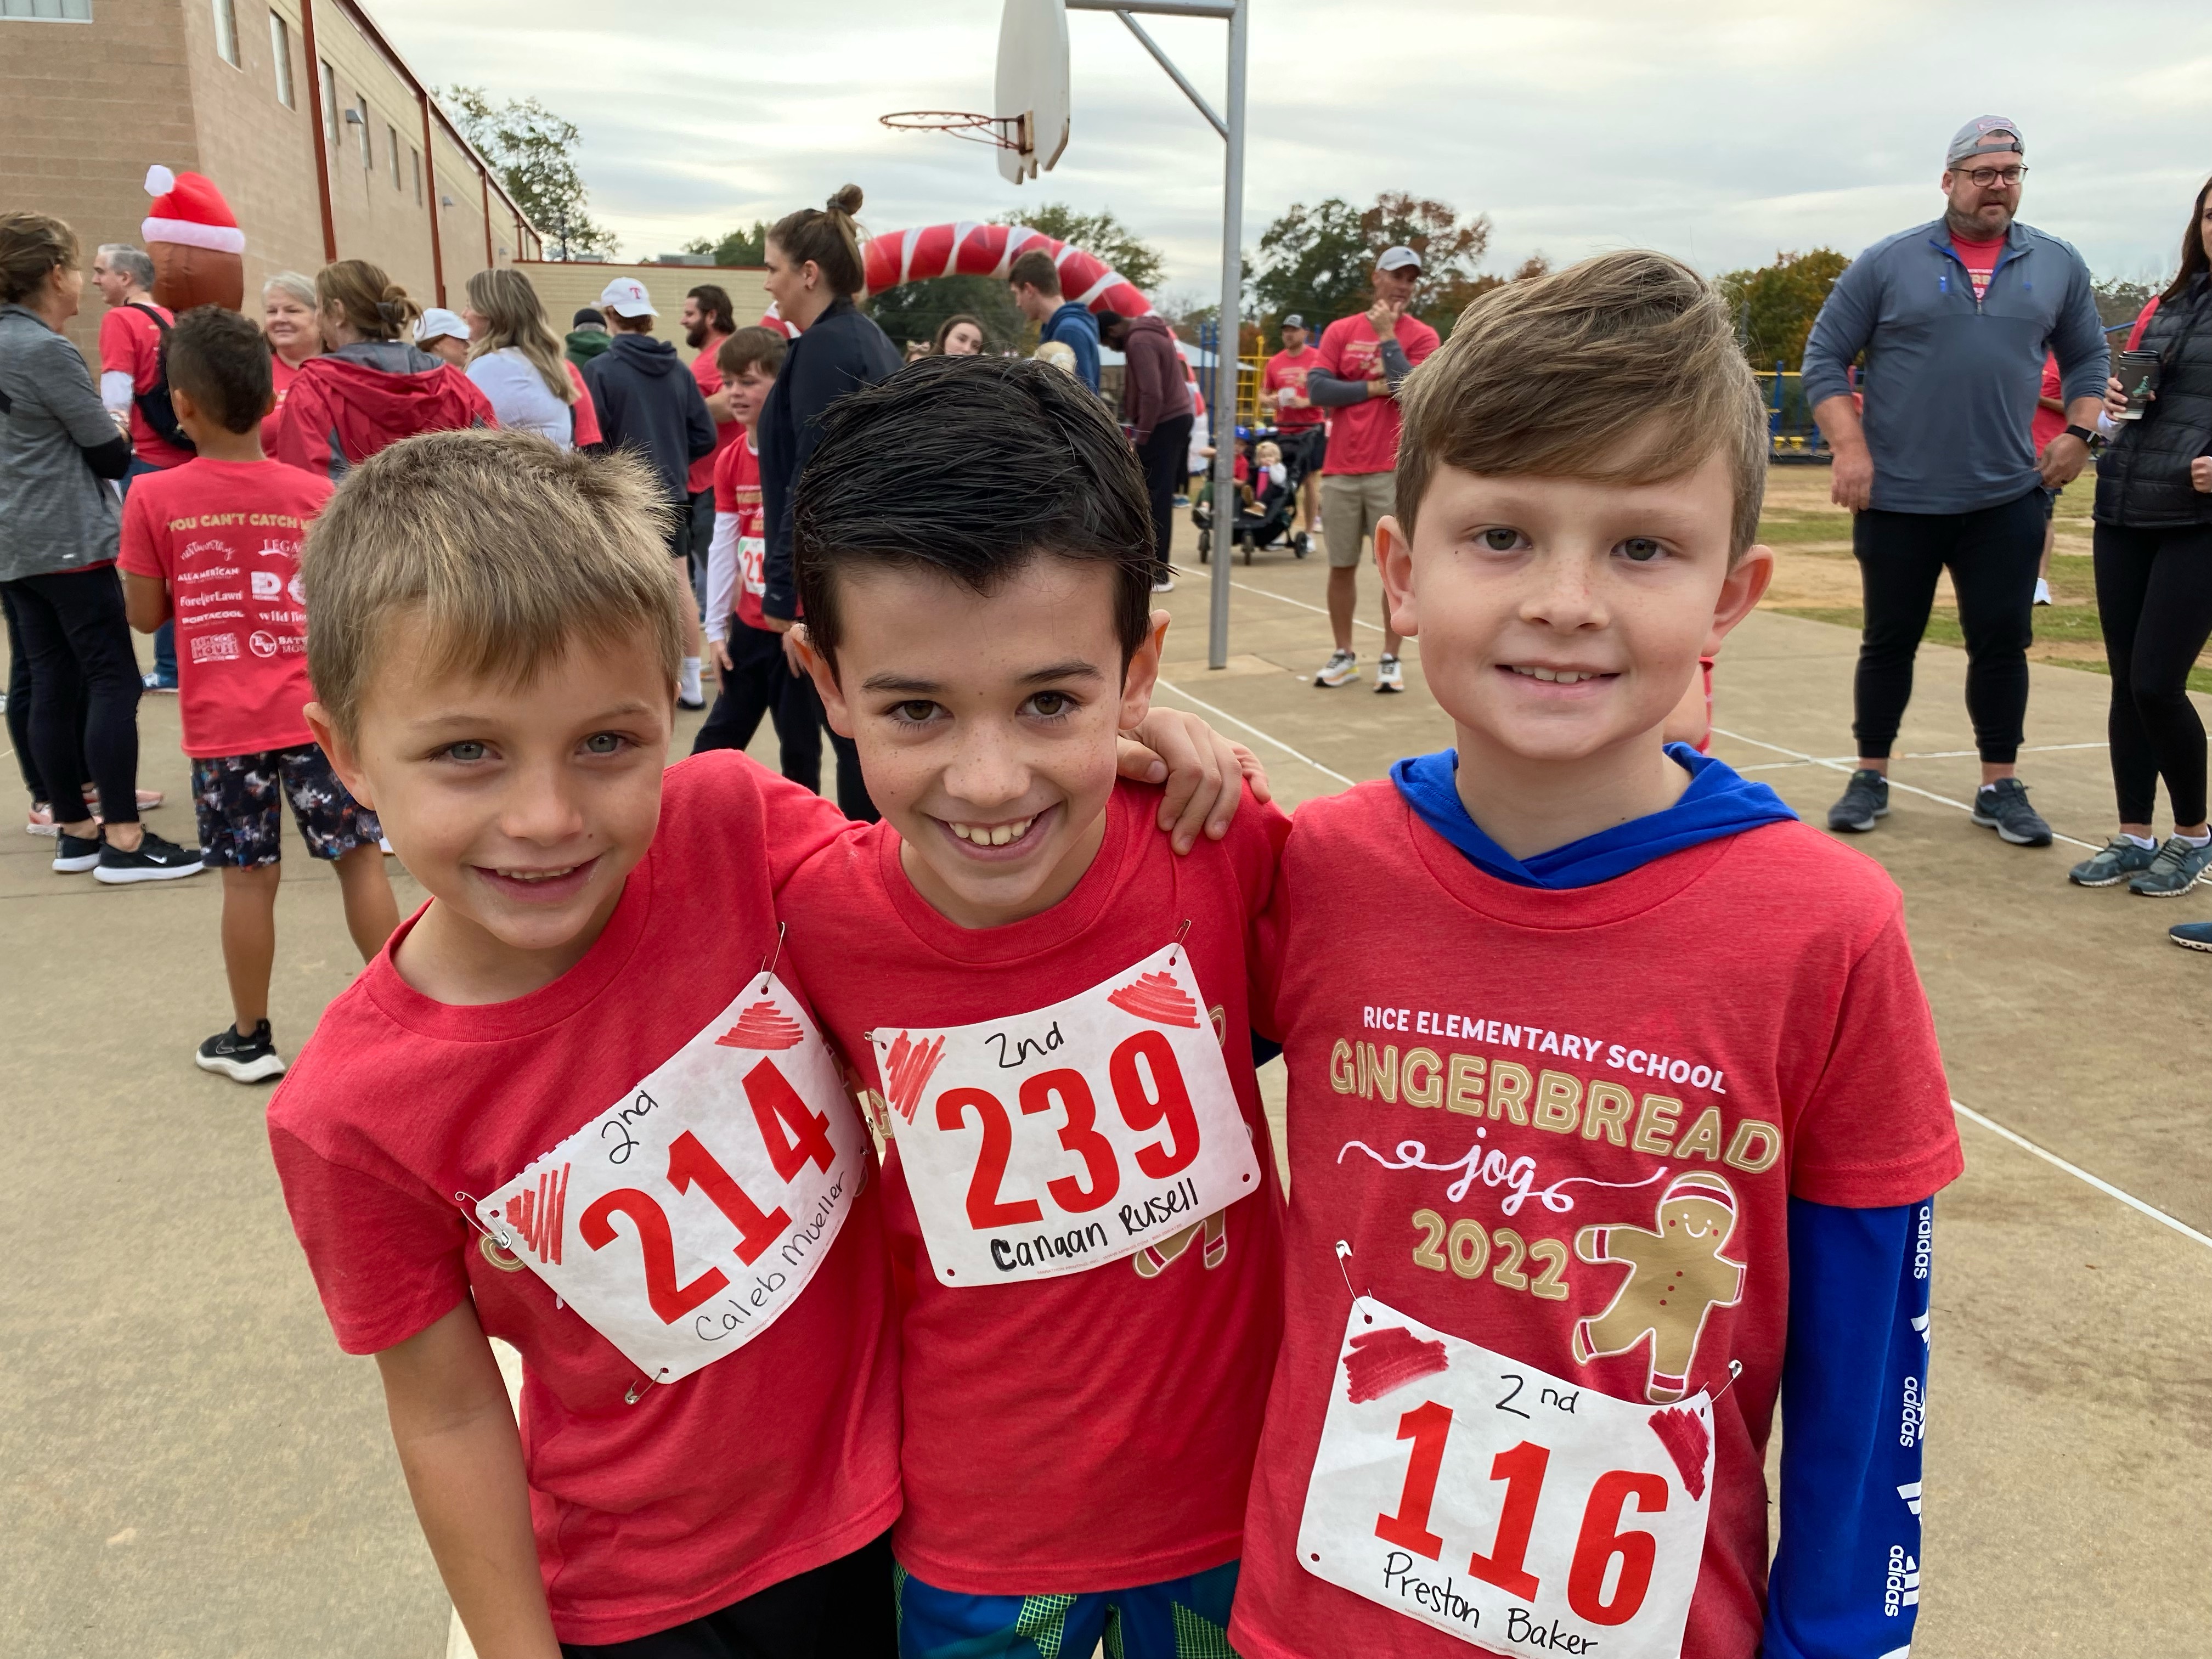 three elementary age boys wearing red shirts standing next to each other